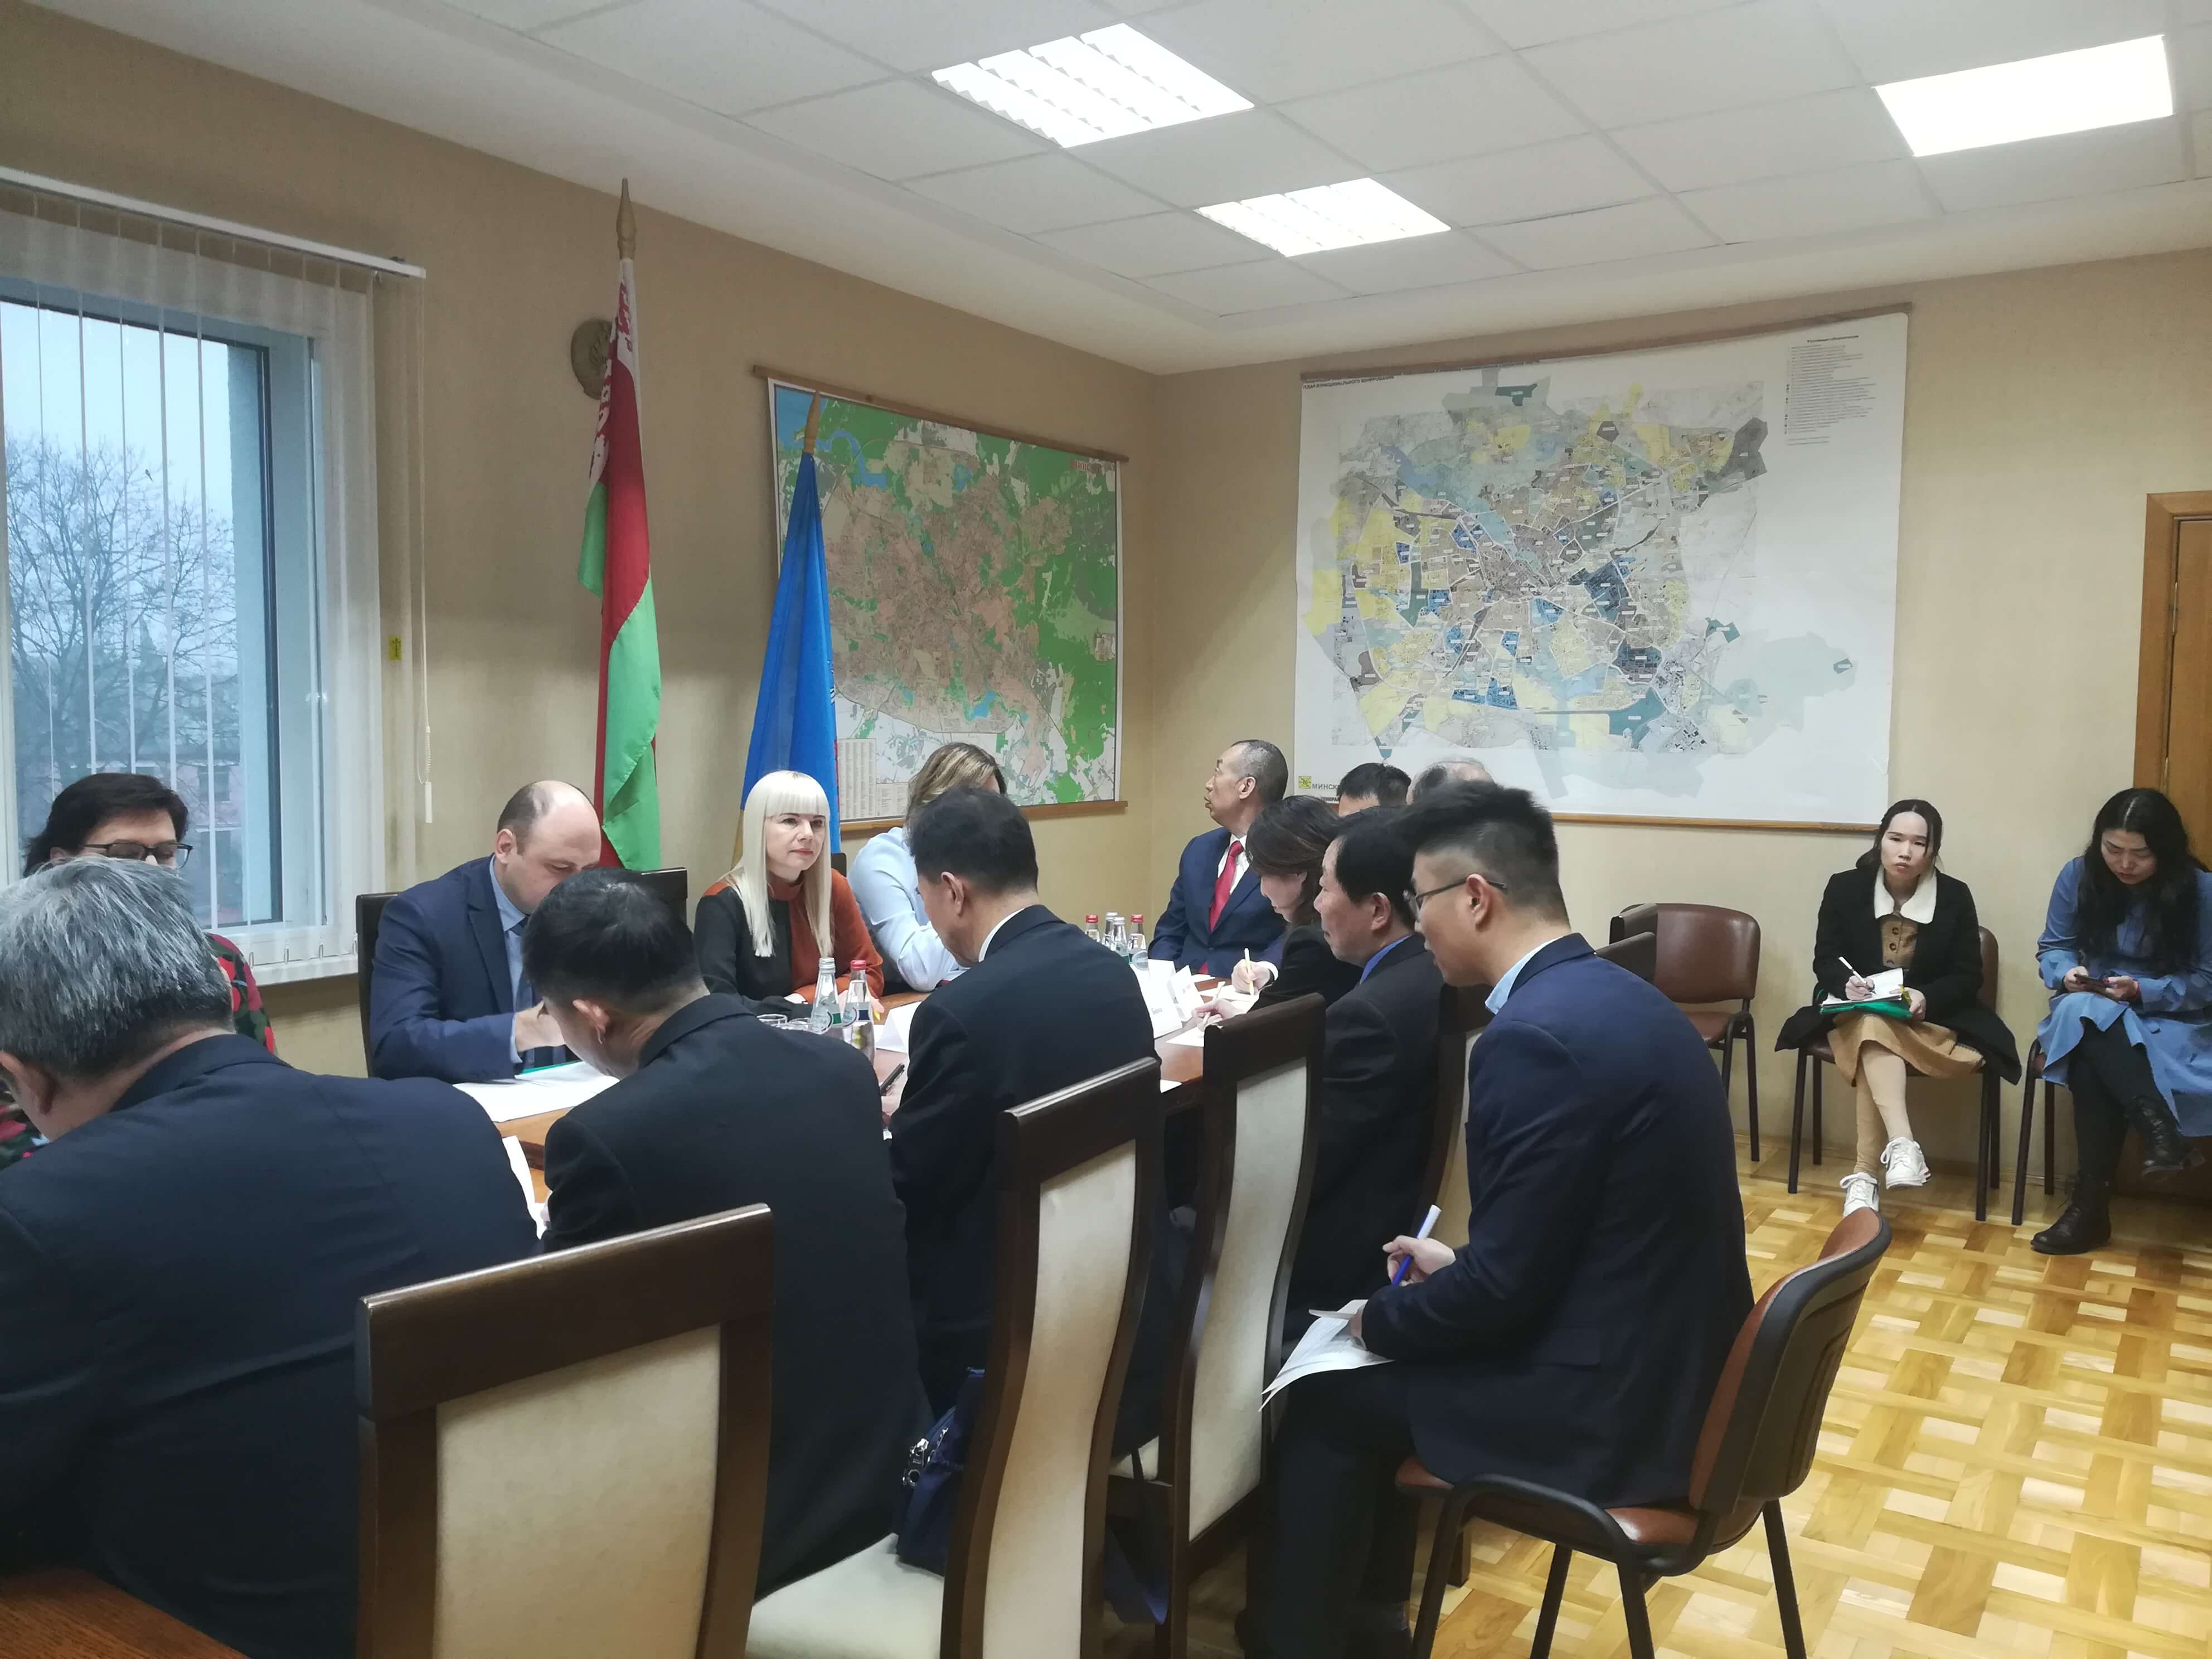 The management of the Committee held a working meeting with the delegation from China